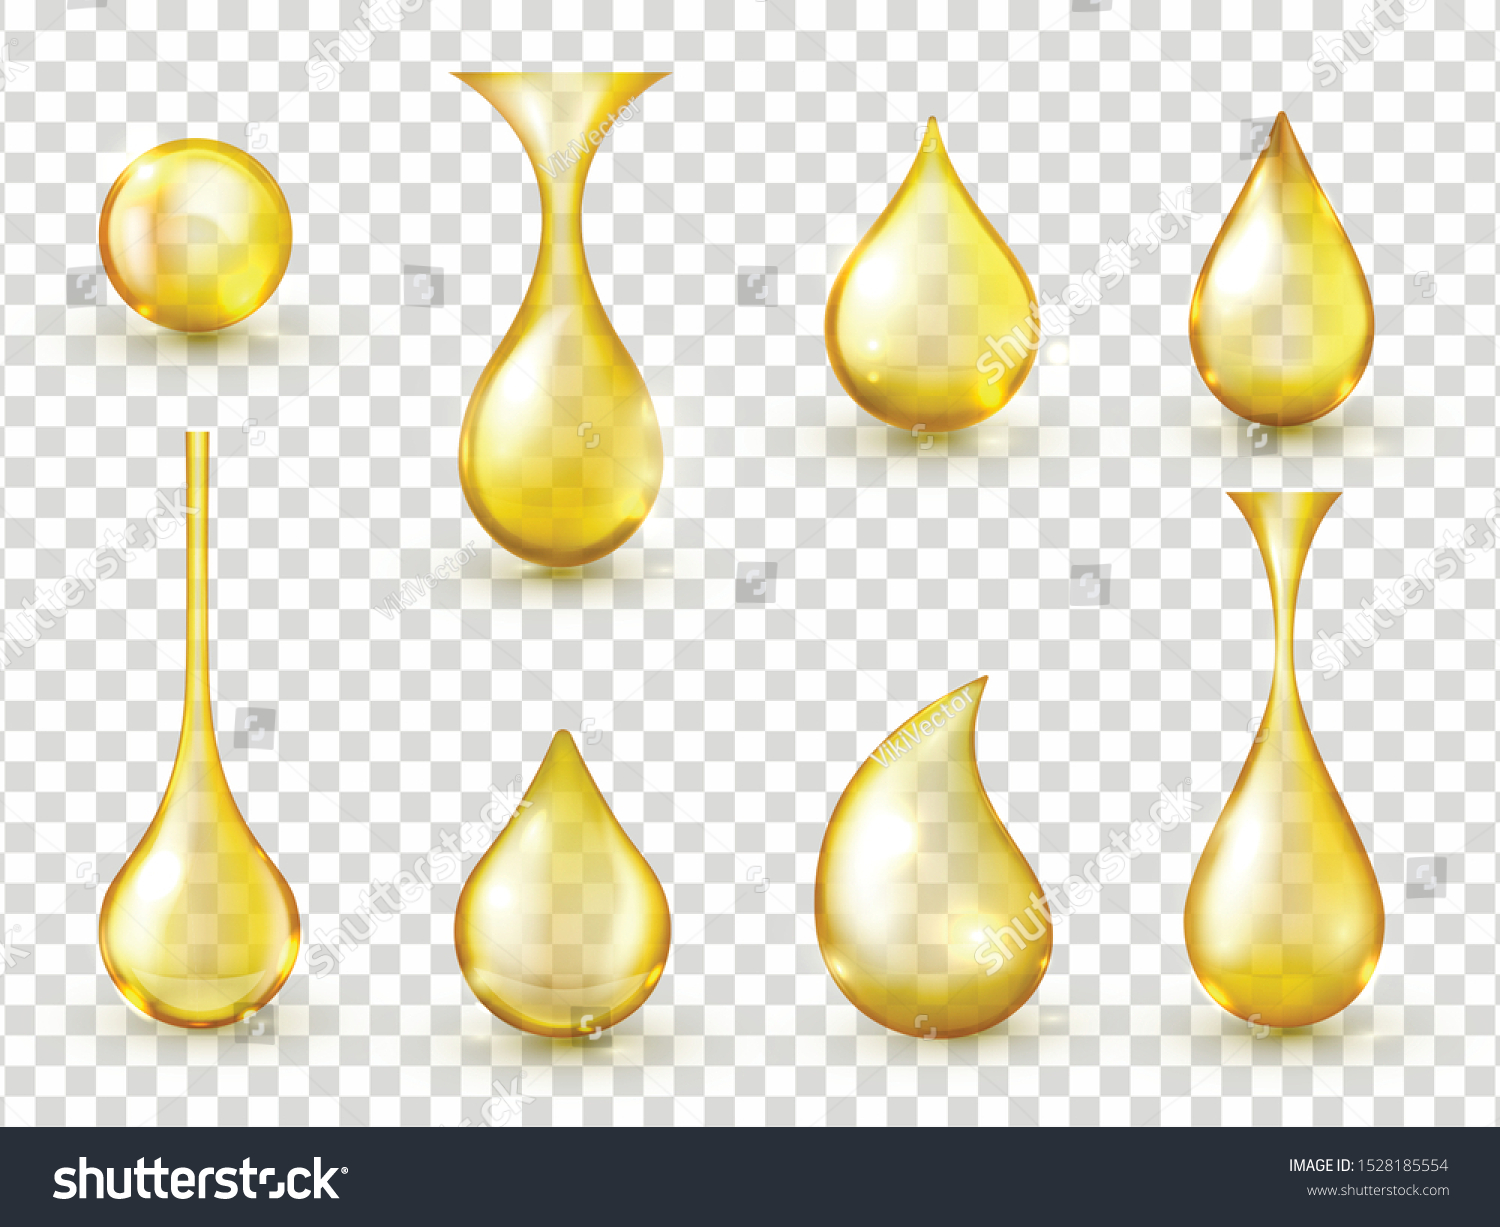 Oil drops realistic vector isolated illustrations collection. Golden liquid essence droplets 3d rendering cliparts on transparent background. Yellow lubricant, honey drip design elements bundle #1528185554